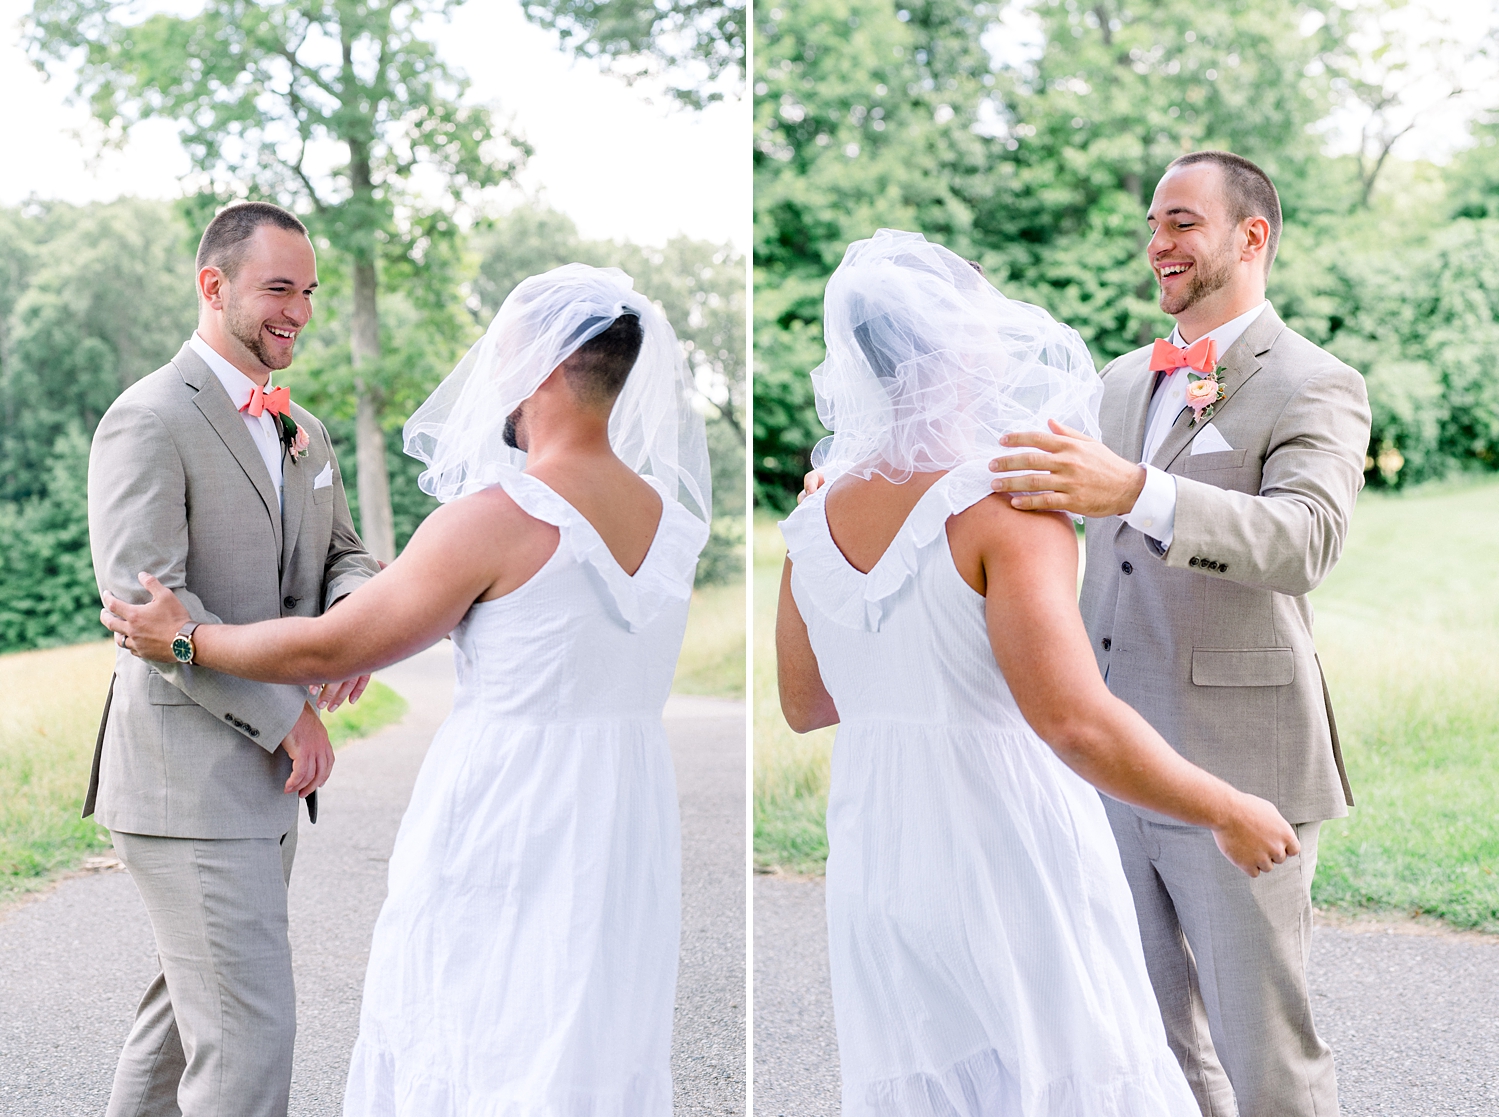 Romantic Garden Themed, Peach and Coral Summertime Wedding by Erika Christine Photography.